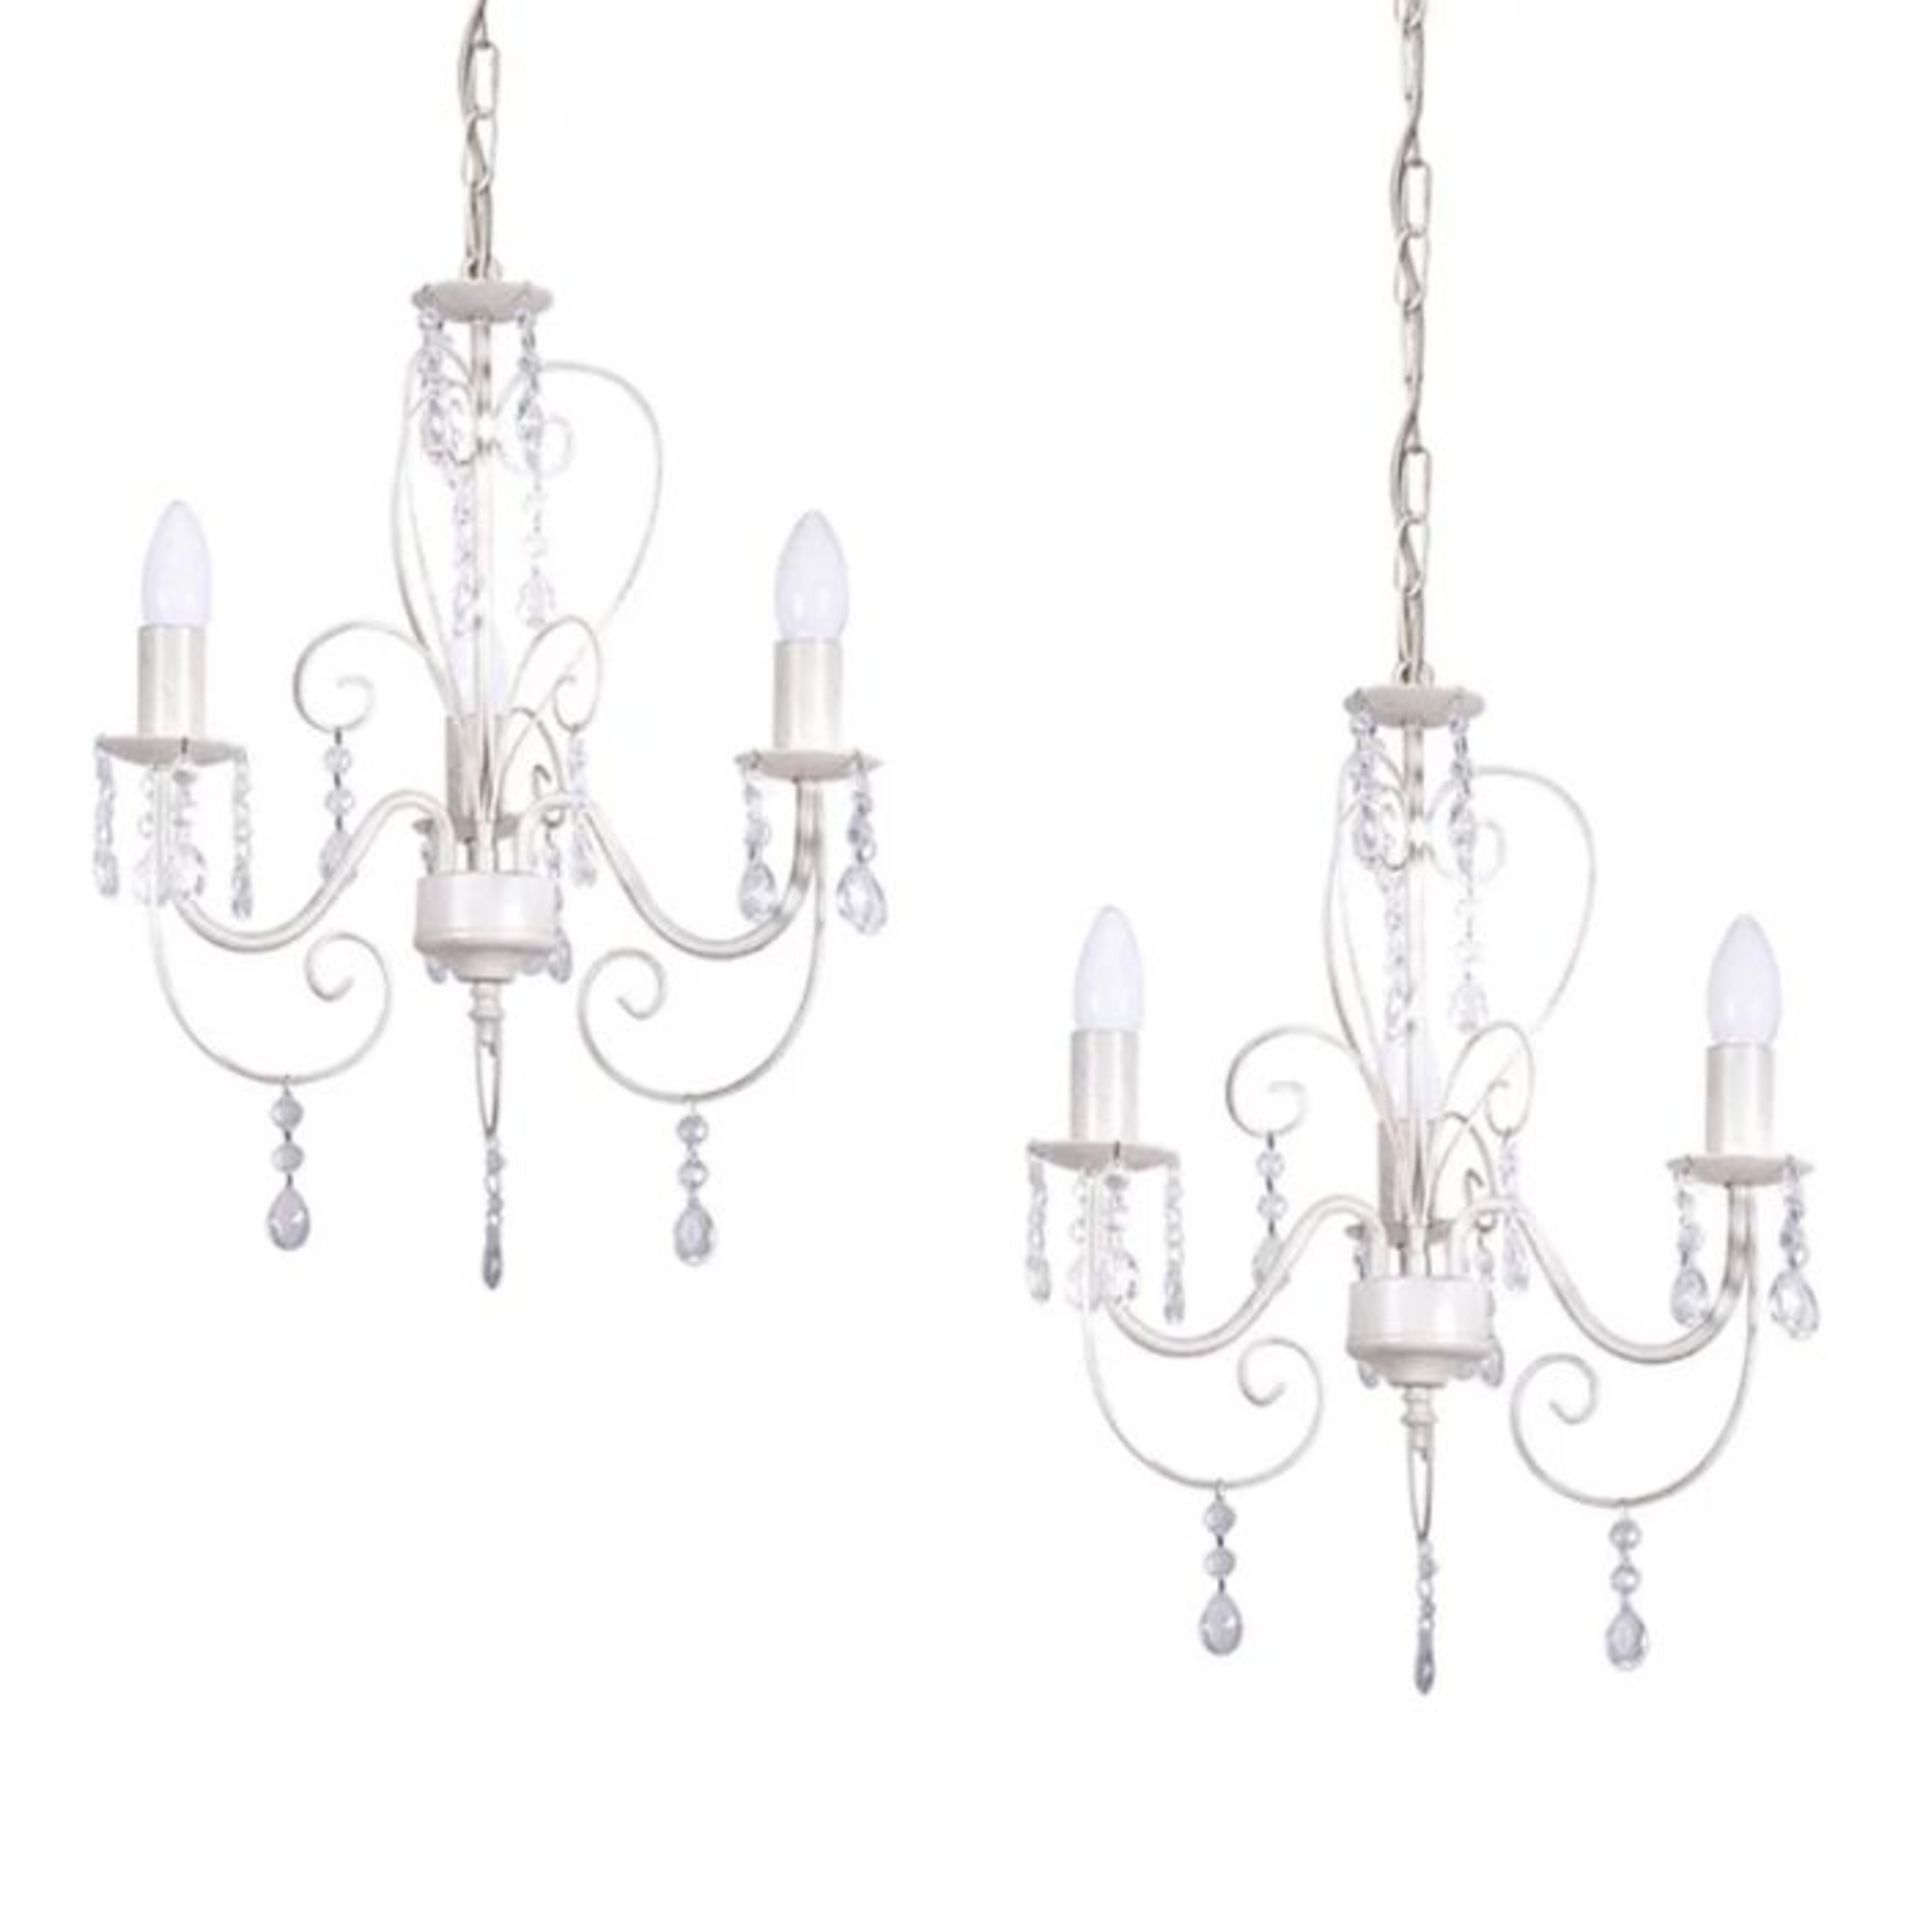 Lily Manor, Piper 3-Light Candle-Style Chandelier (DISTRESSED WHITE) - RRP £34.99 (MSUN6111 -